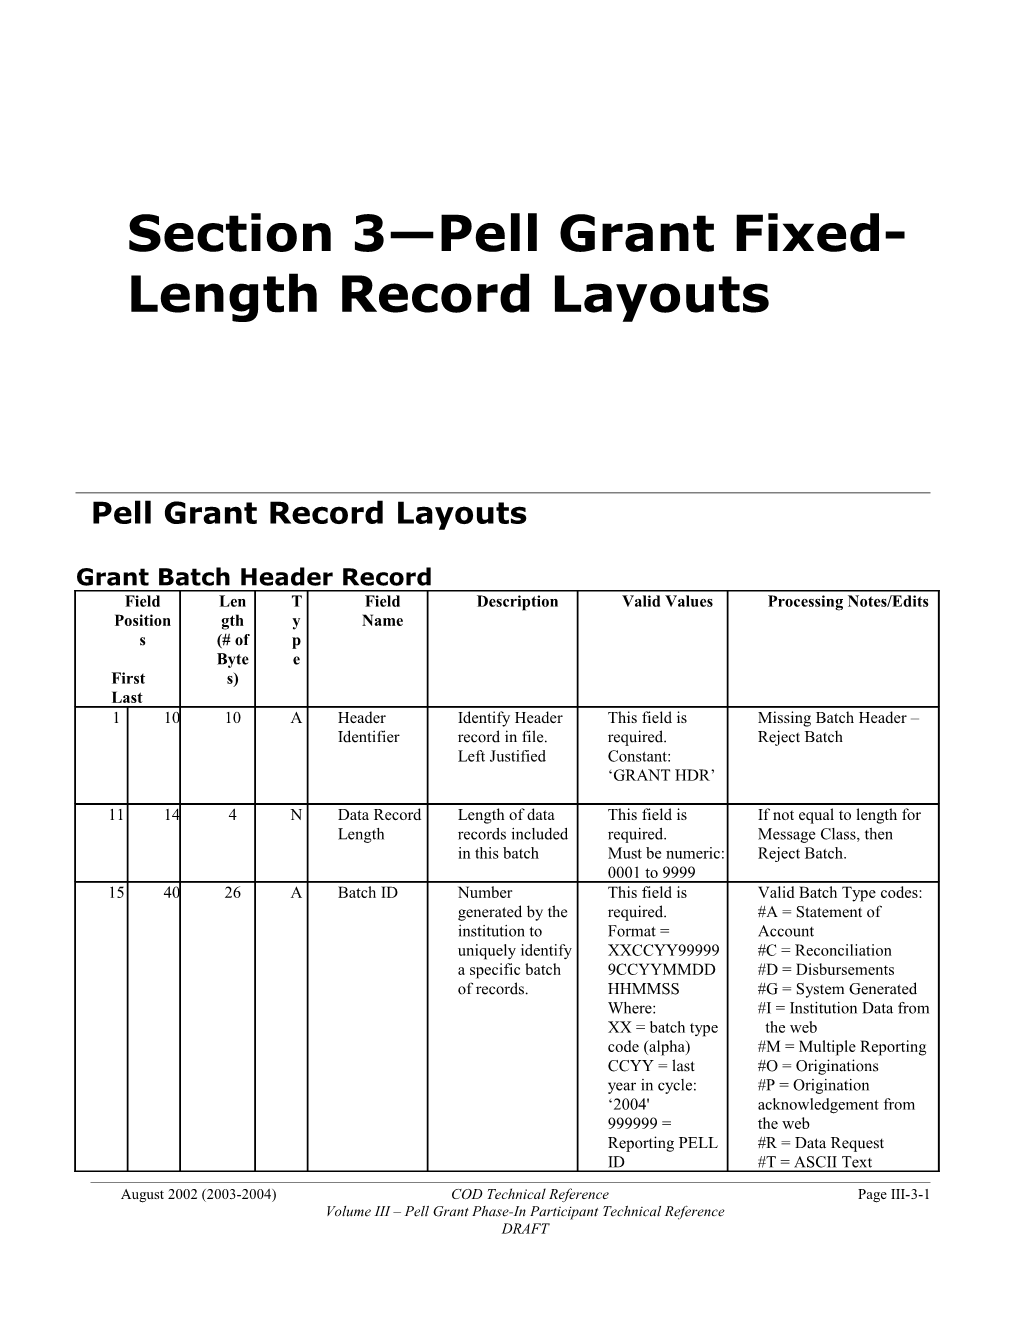 Section 3 Pell Grant Fixed-Length Record Layouts